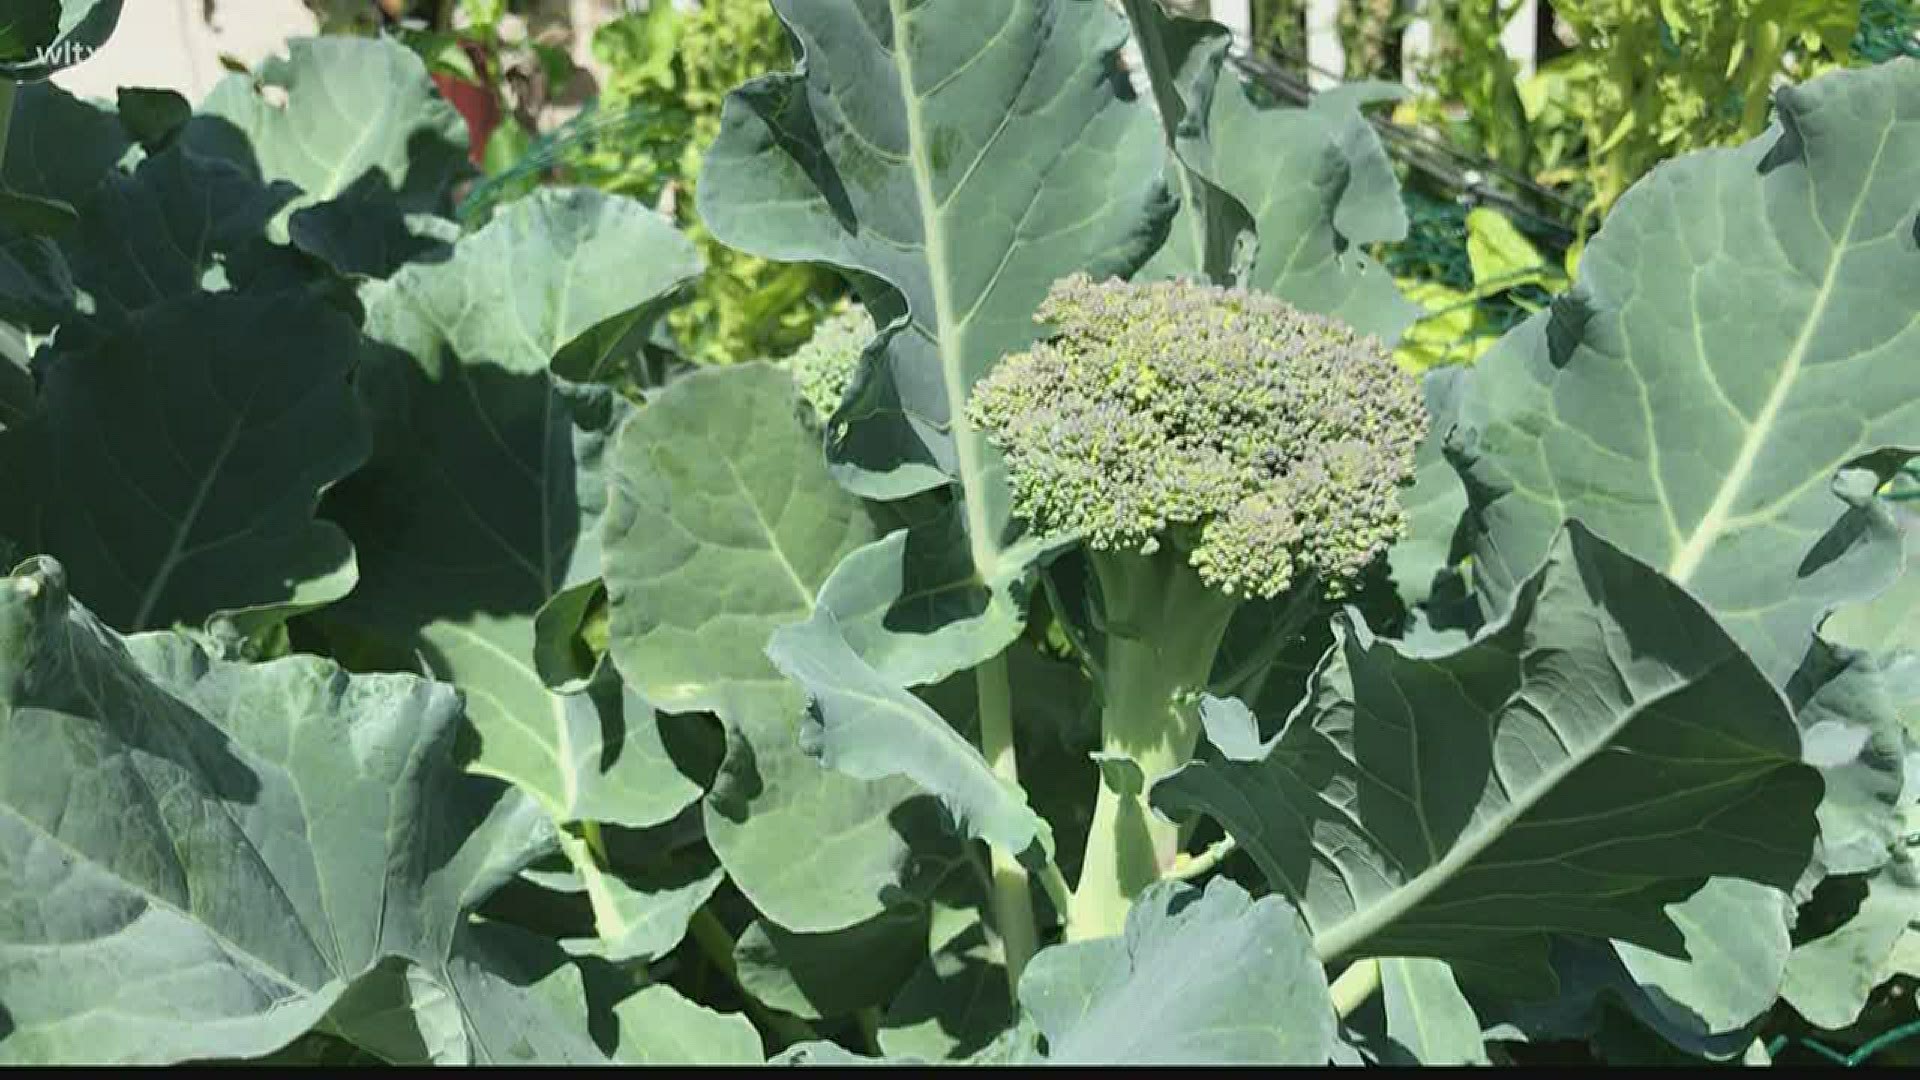 Our broccoli is ready for picking in Gandy’s Garden. Meteorologist Alex Calamia tells us how long it takes to grow broccoli from seed and a perk to growing your own.